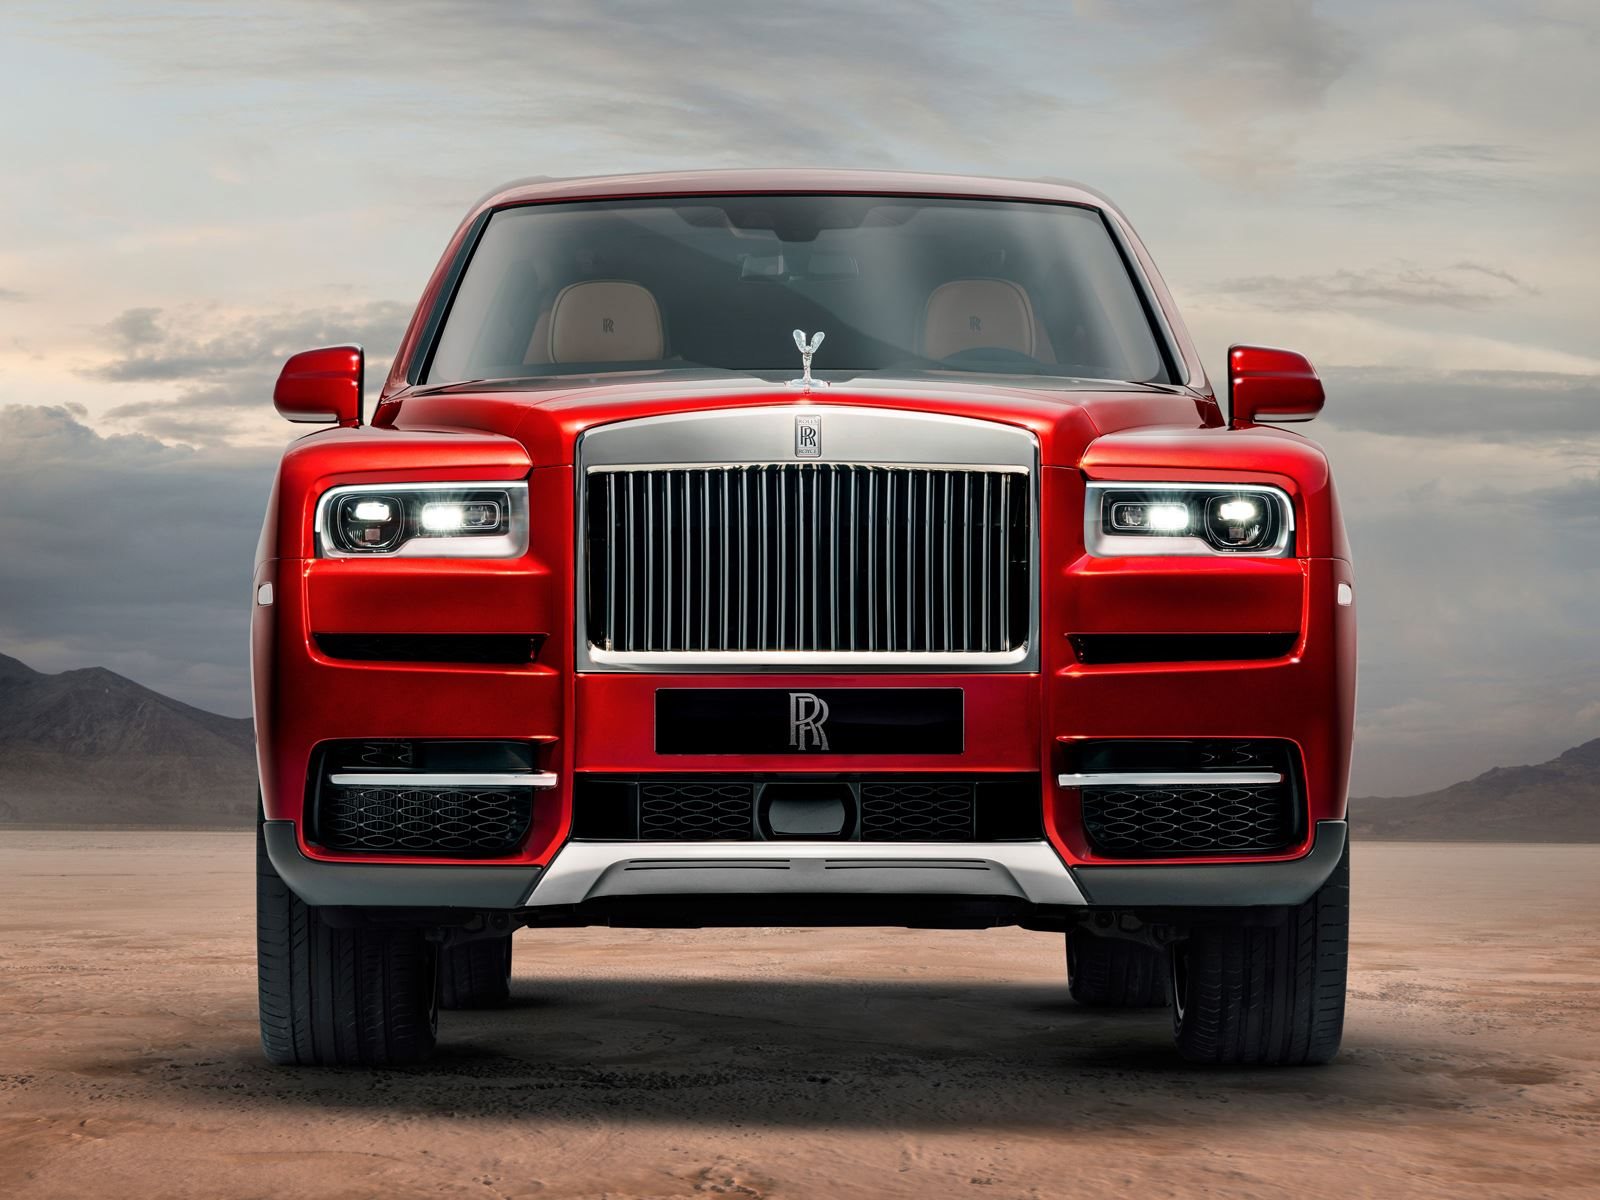 Consumers can't get enough Bentley, Lamborghini and Rolls-Royce SUVs